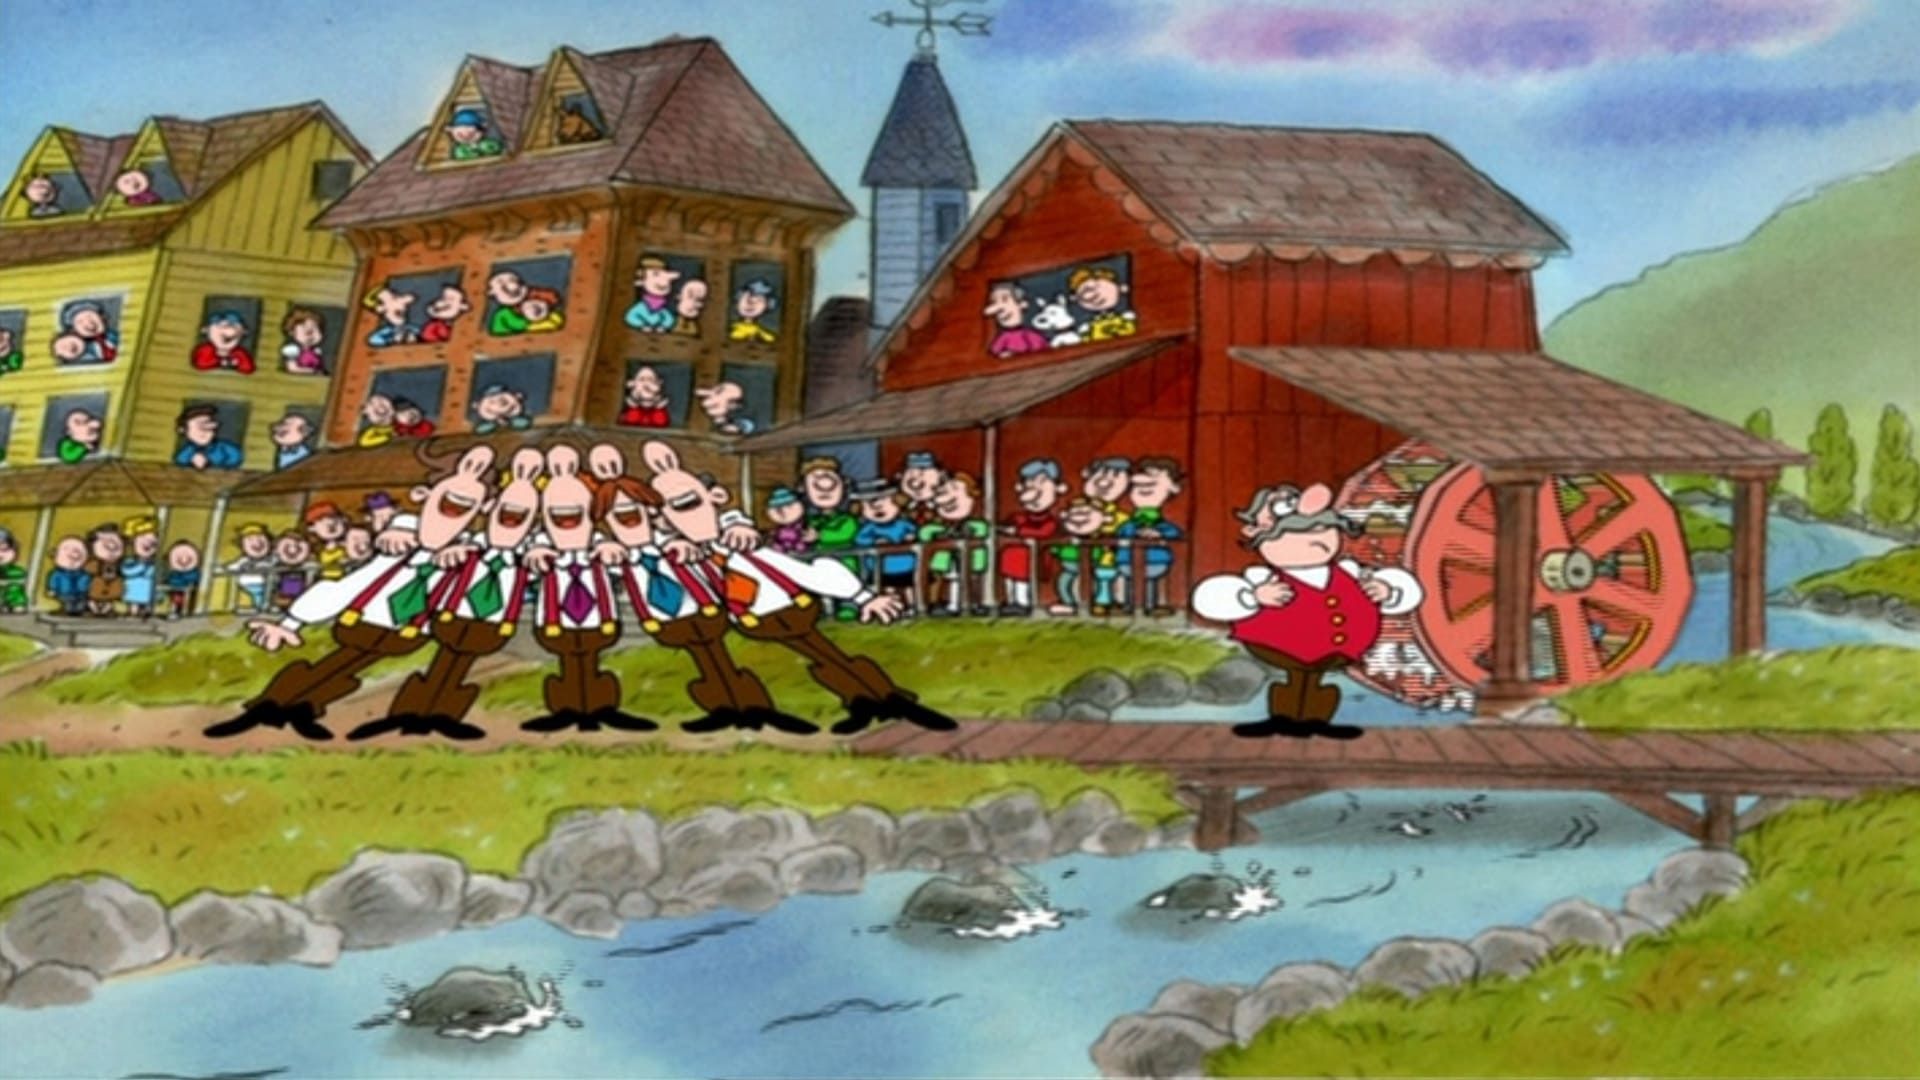 It's the Pied Piper, Charlie Brown background